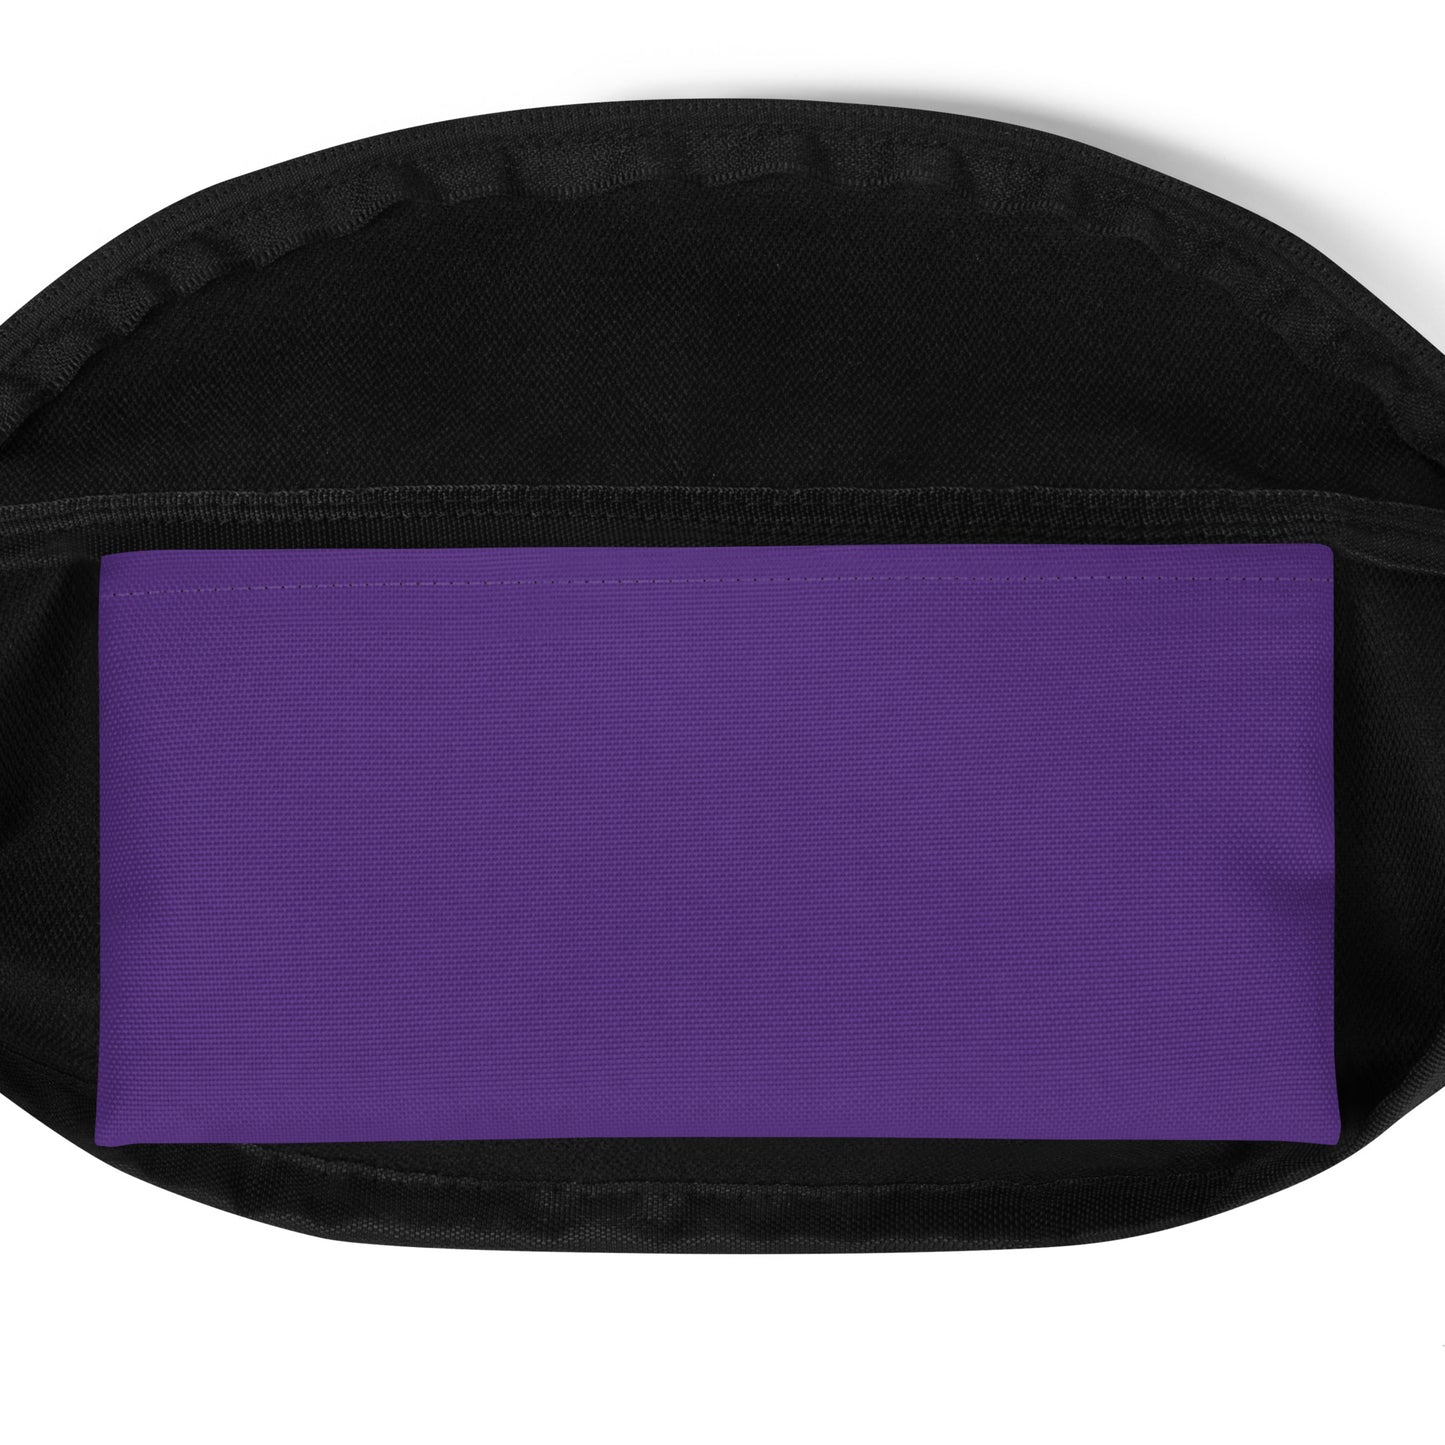 Fanny Pack - Empath Home Health